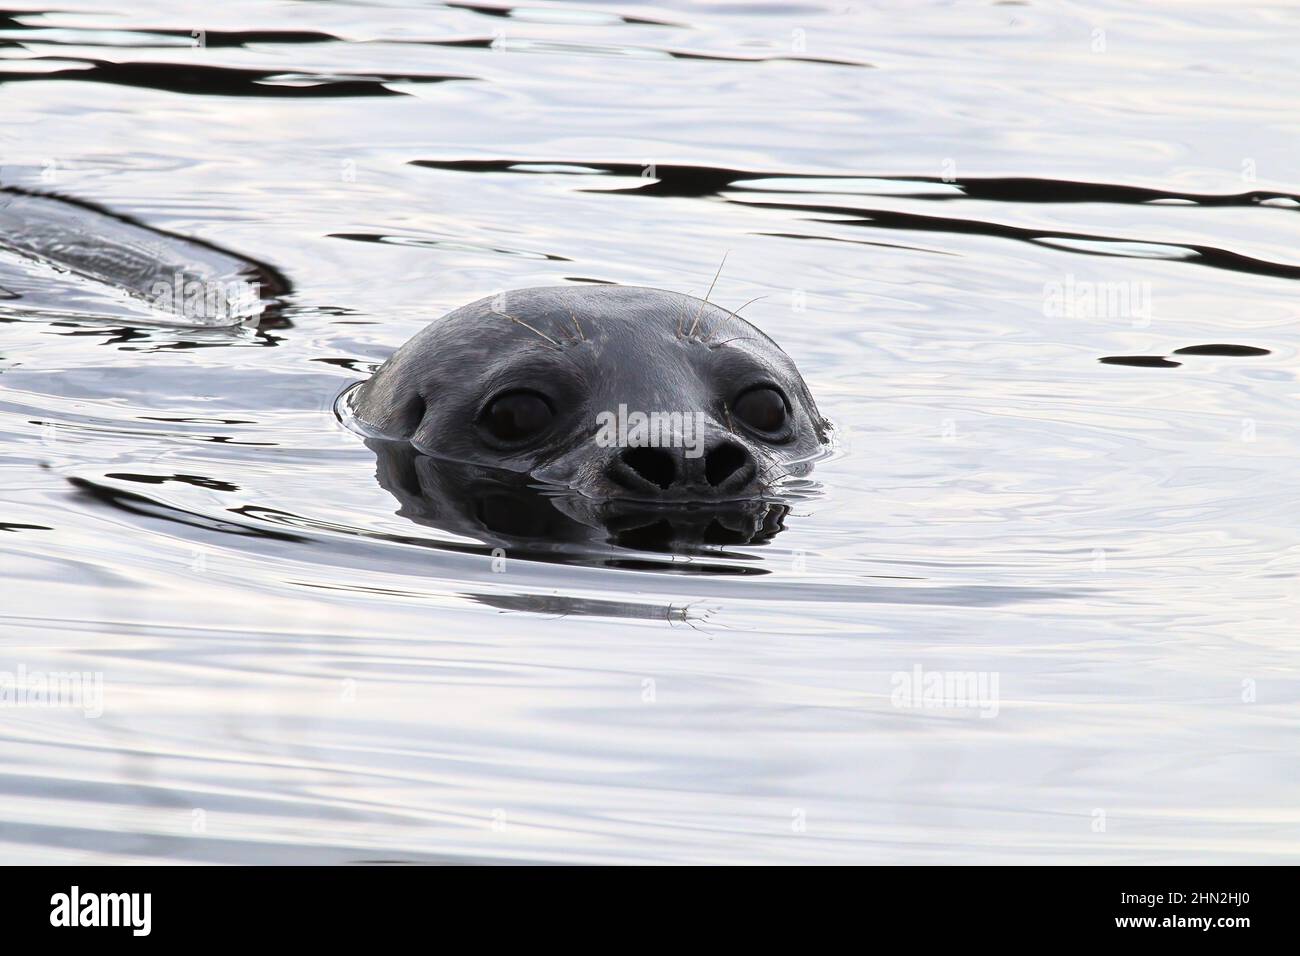 Closeup portrait of a seal head swimming in water Stock Photo